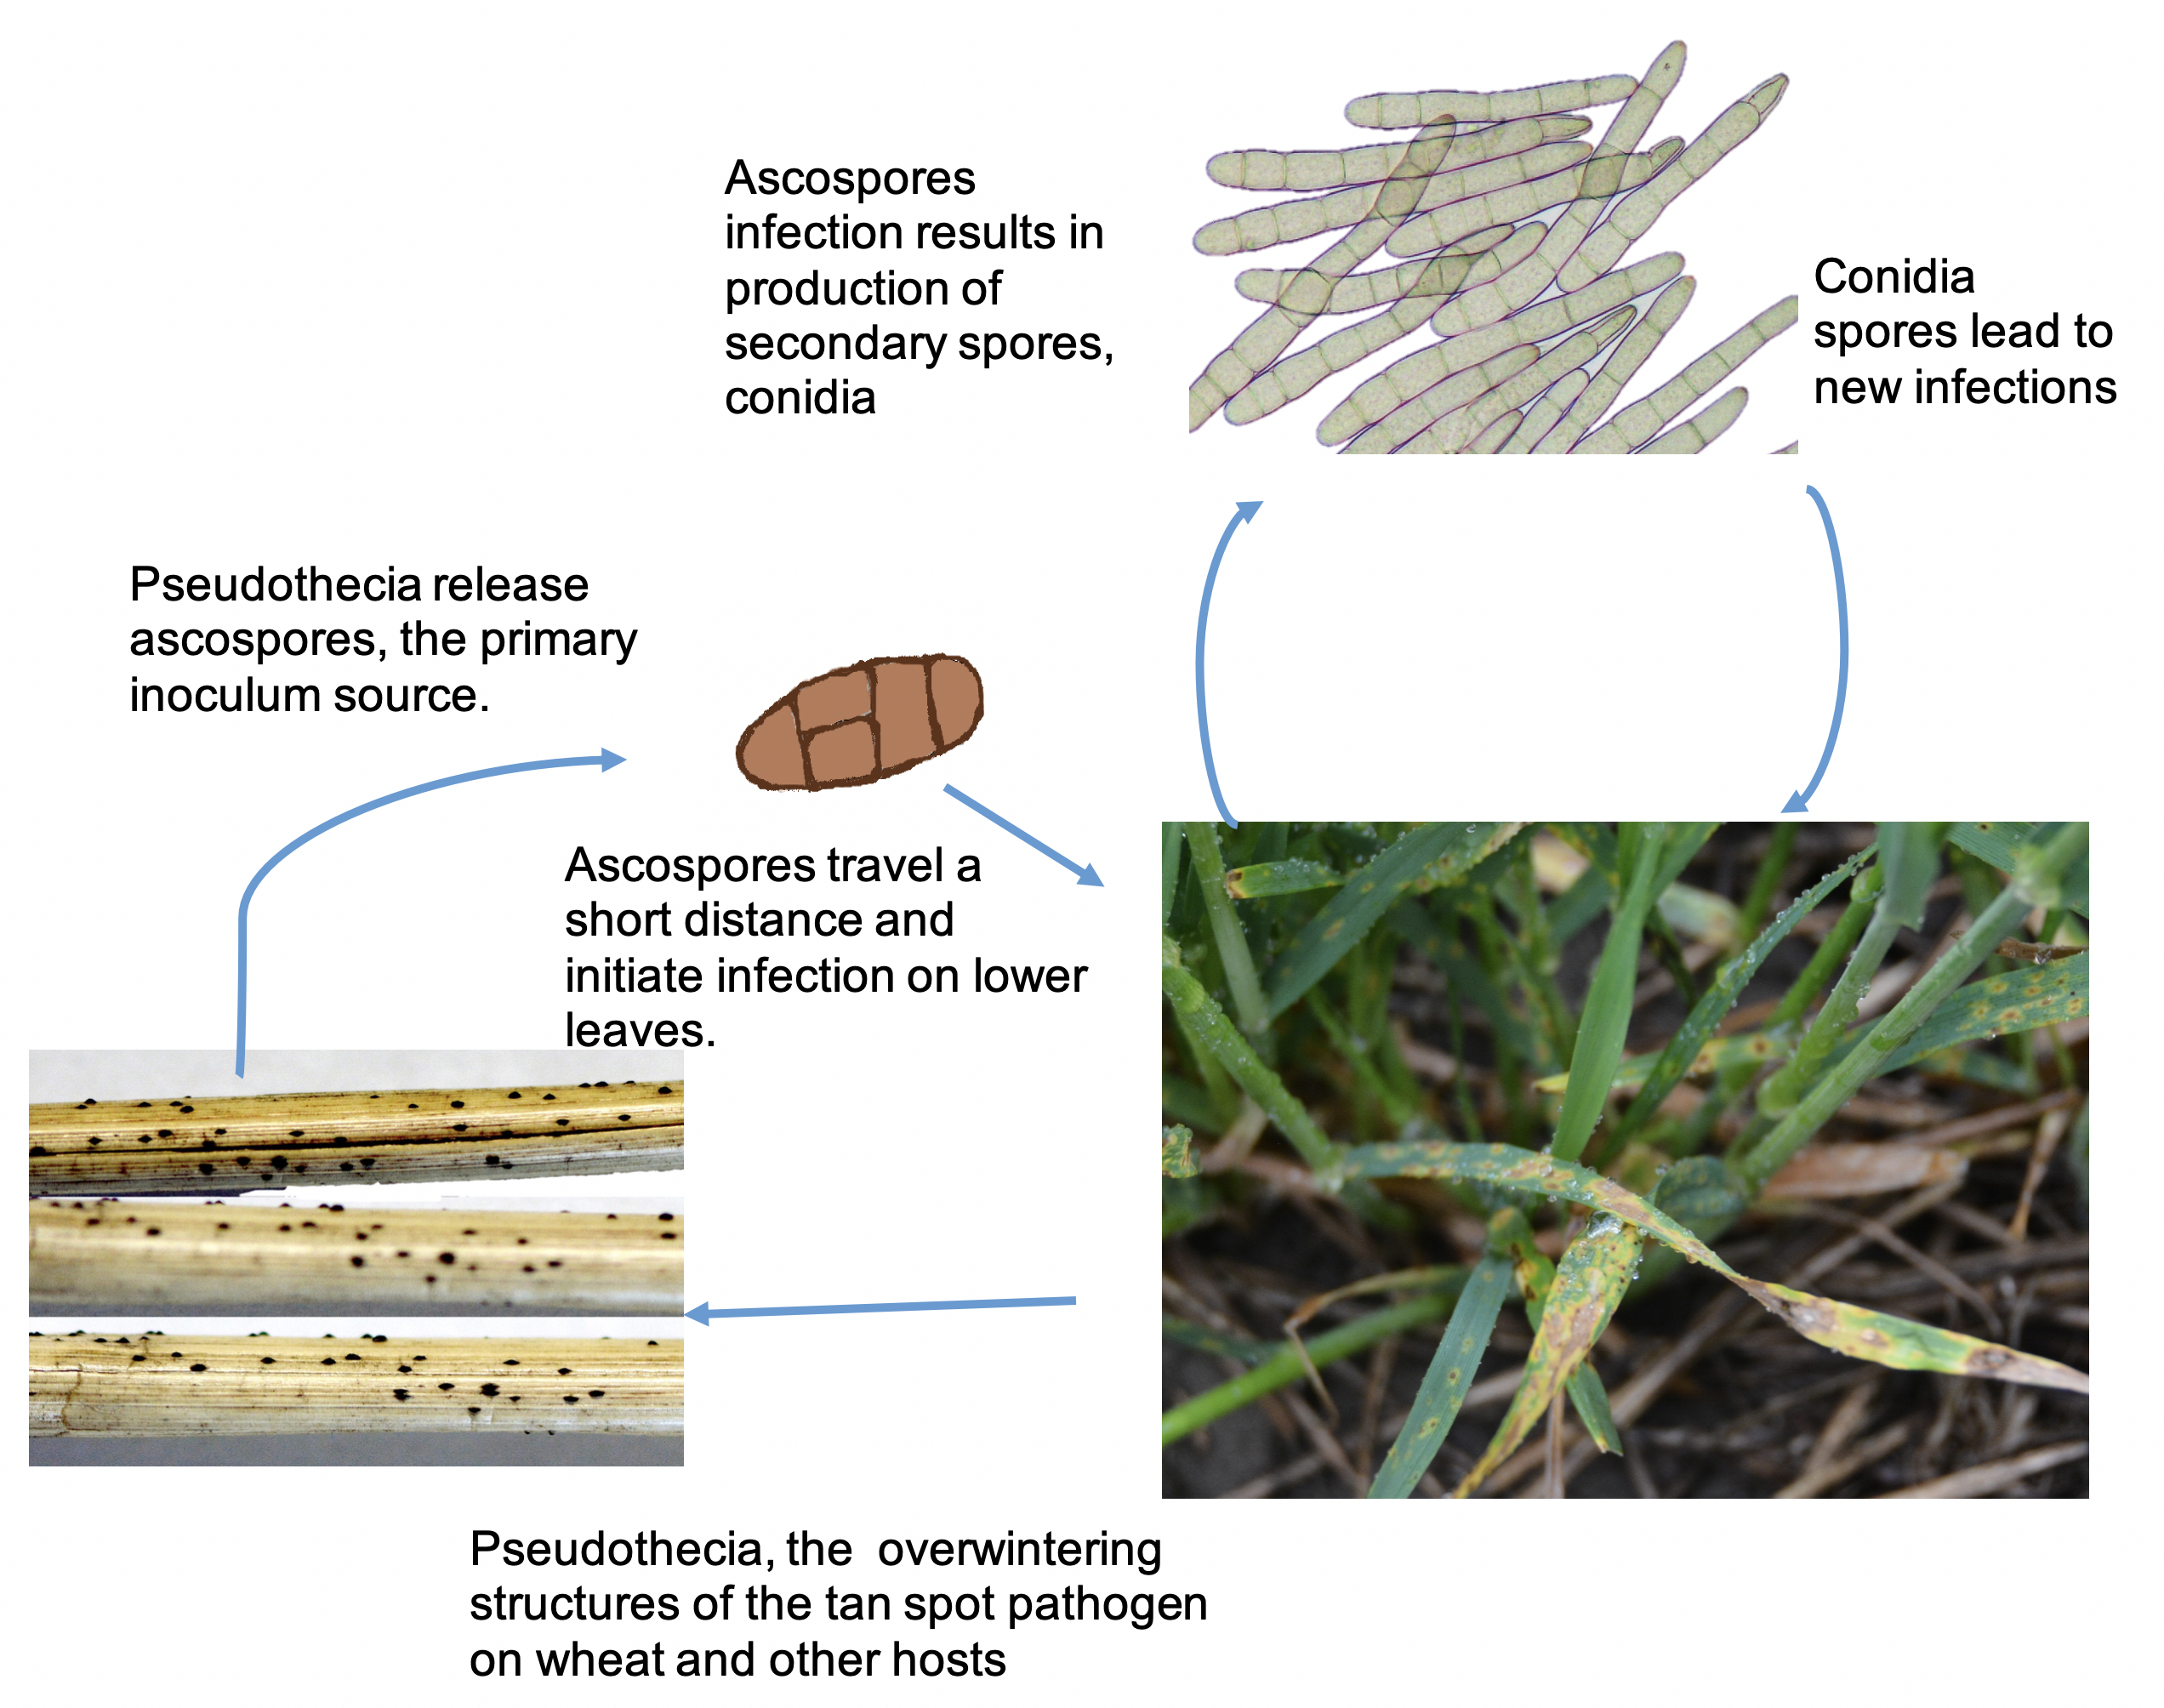 Tan spot disease cycle diagram. The disease begins with Pseudothecia, the overwintering structures of the tan spot pathogen on wheat and other hosts. It releases acospores, the primary inoculum source. The spores travel a short disbands and initiate infection on lower leaves. The infection results in production of secondary spores, conidia. Conidia spores lead to new infections.